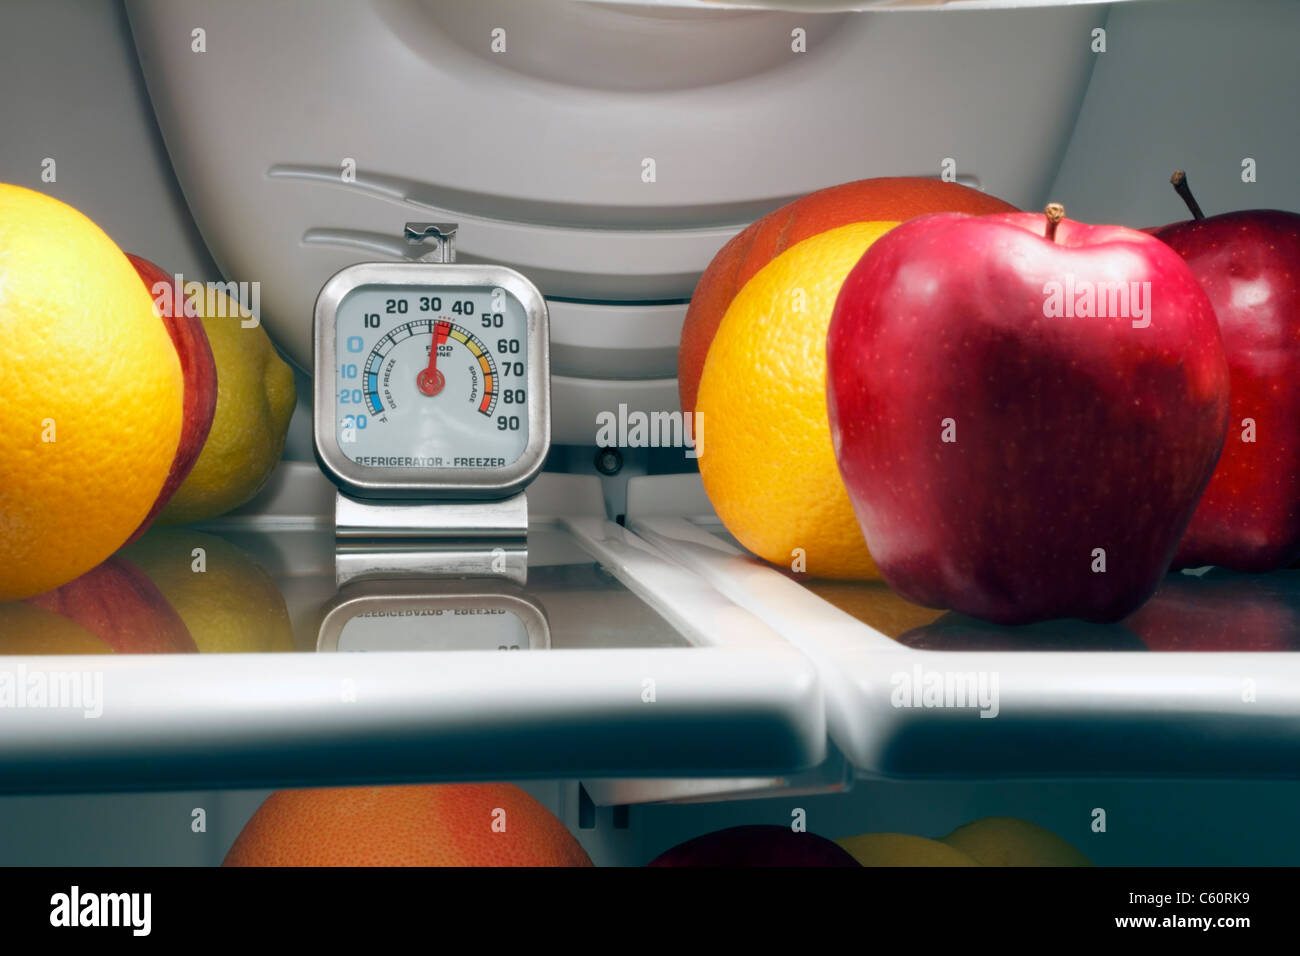 Refrigerator thermometer inside the top shelf of a cool food storage fridge to see perishables are kept safe and cold. Fridge thermometer for safety. Stock Photo